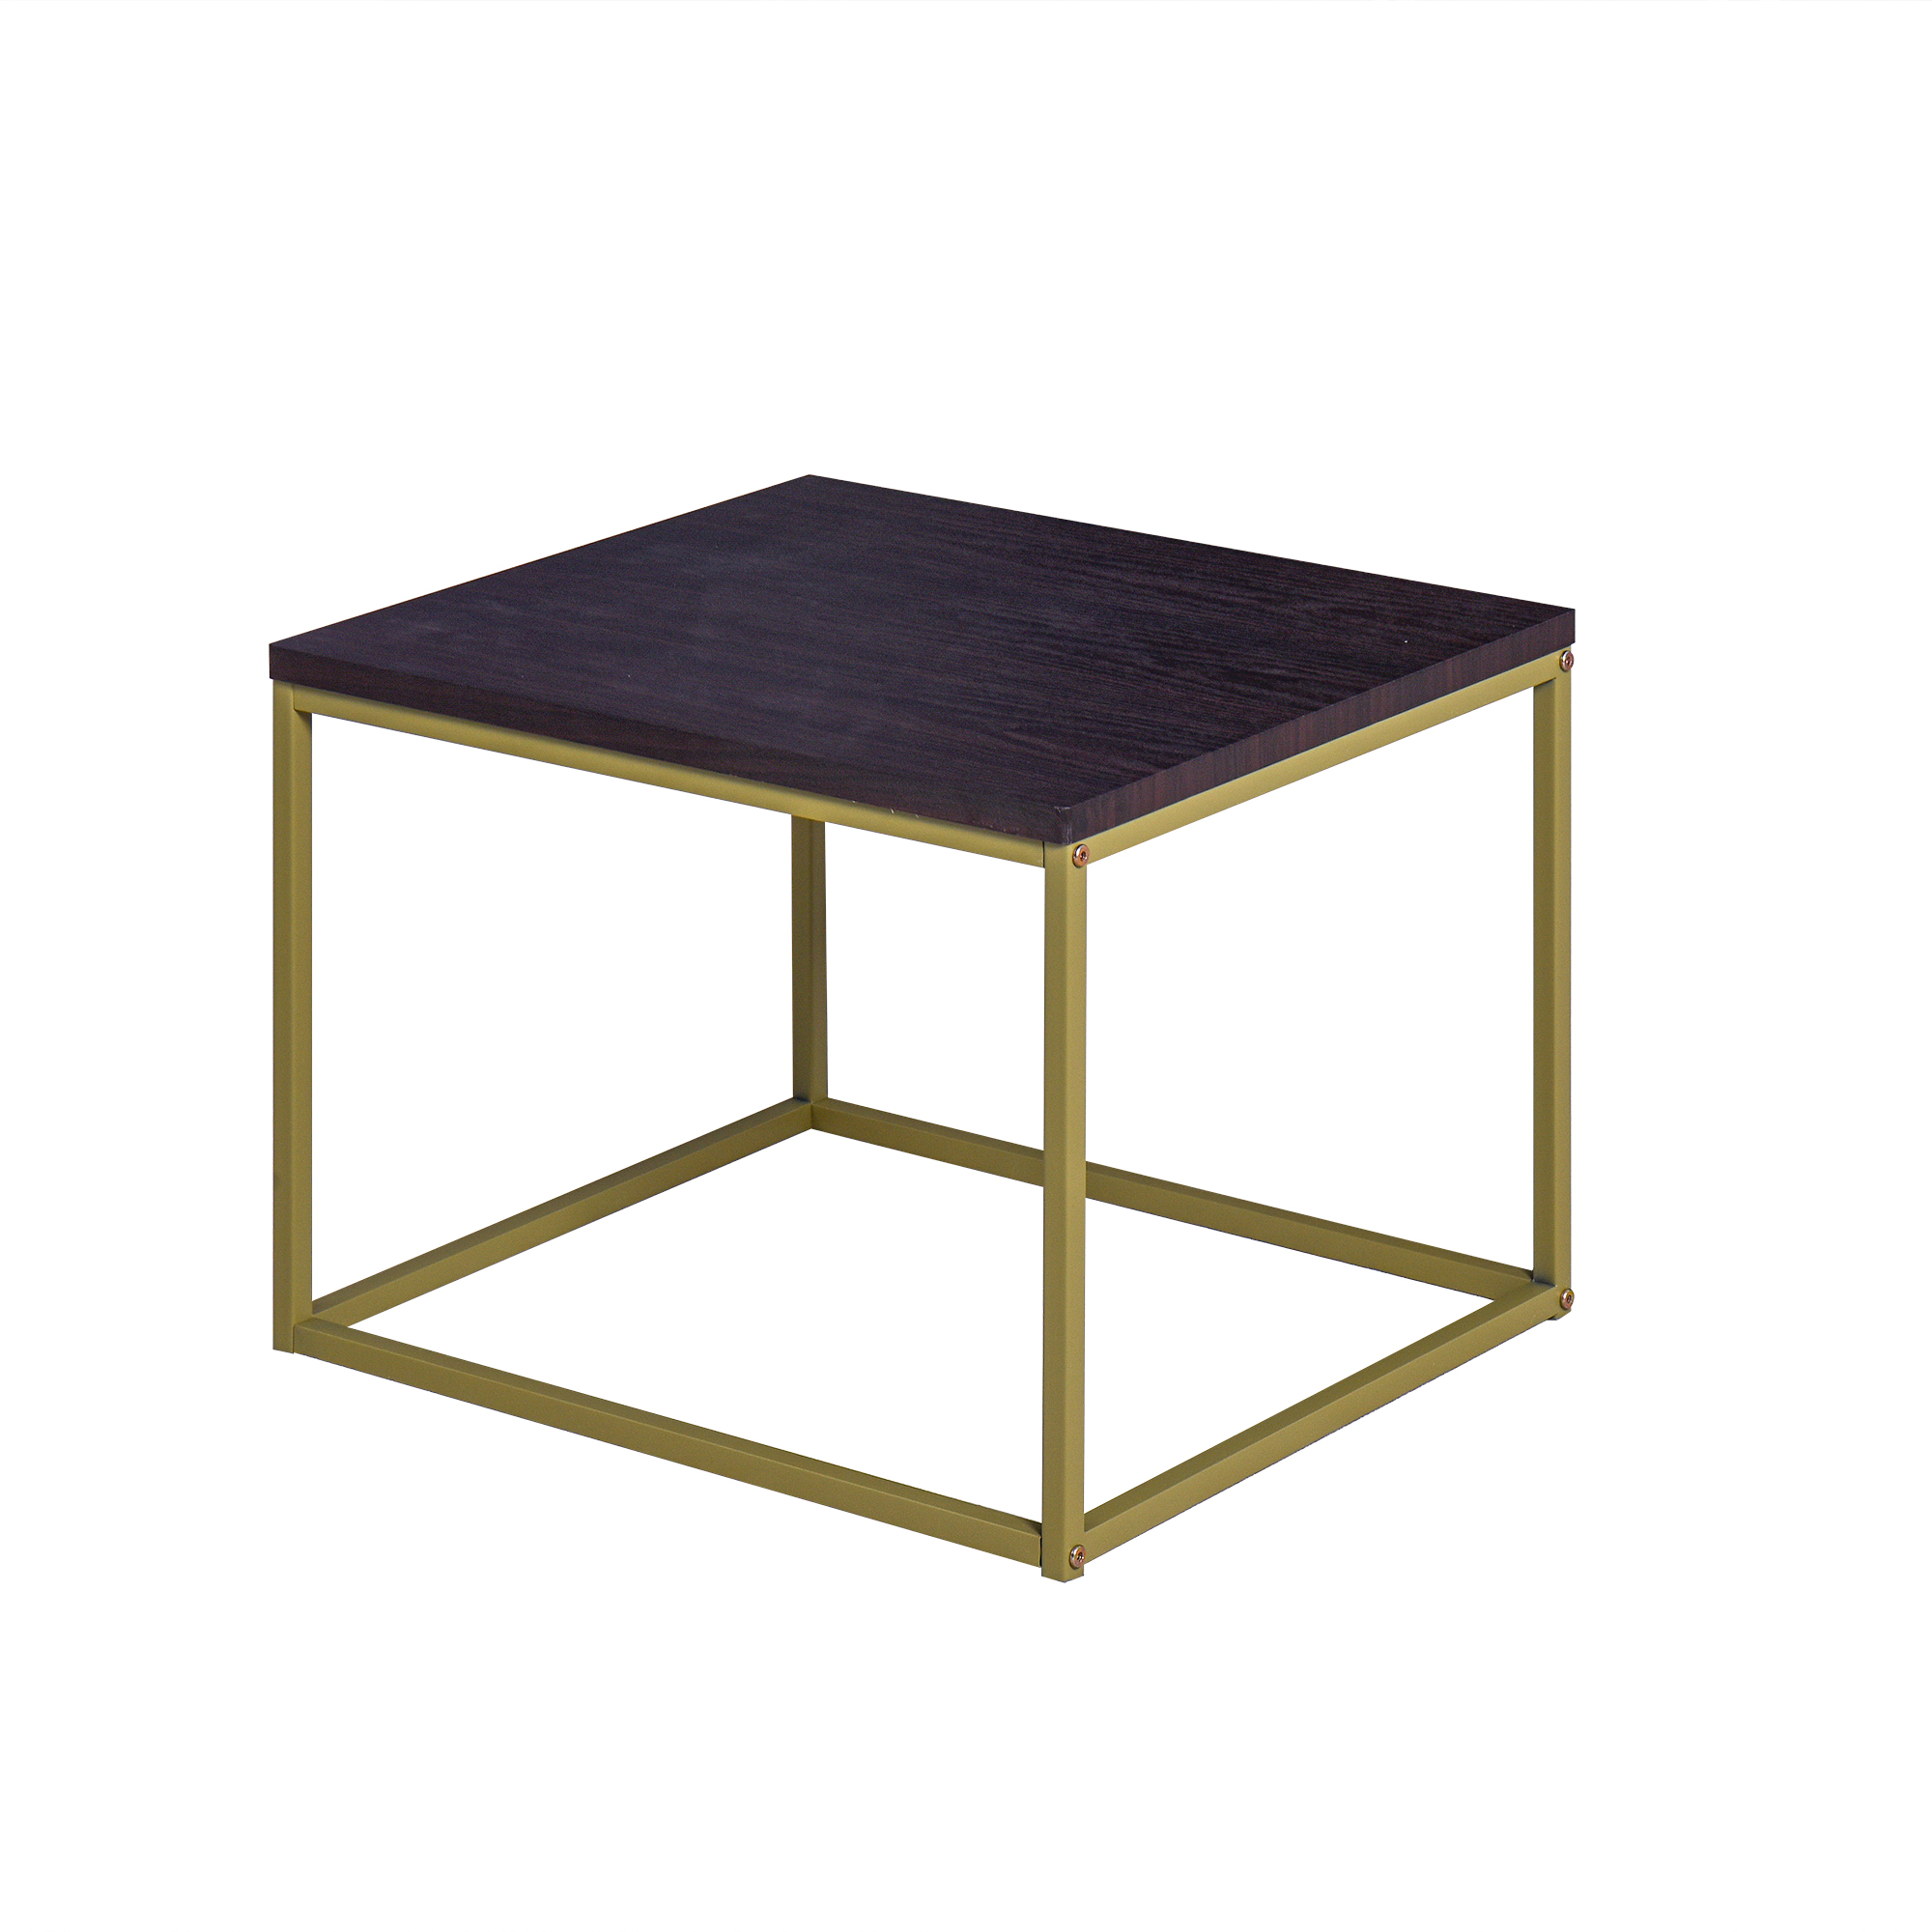 Living Room Black Coffee Table with MDF Top, Nesting Table with Metal Legs 17.71 x 20.87 x 15.35 inch-Boyel Living